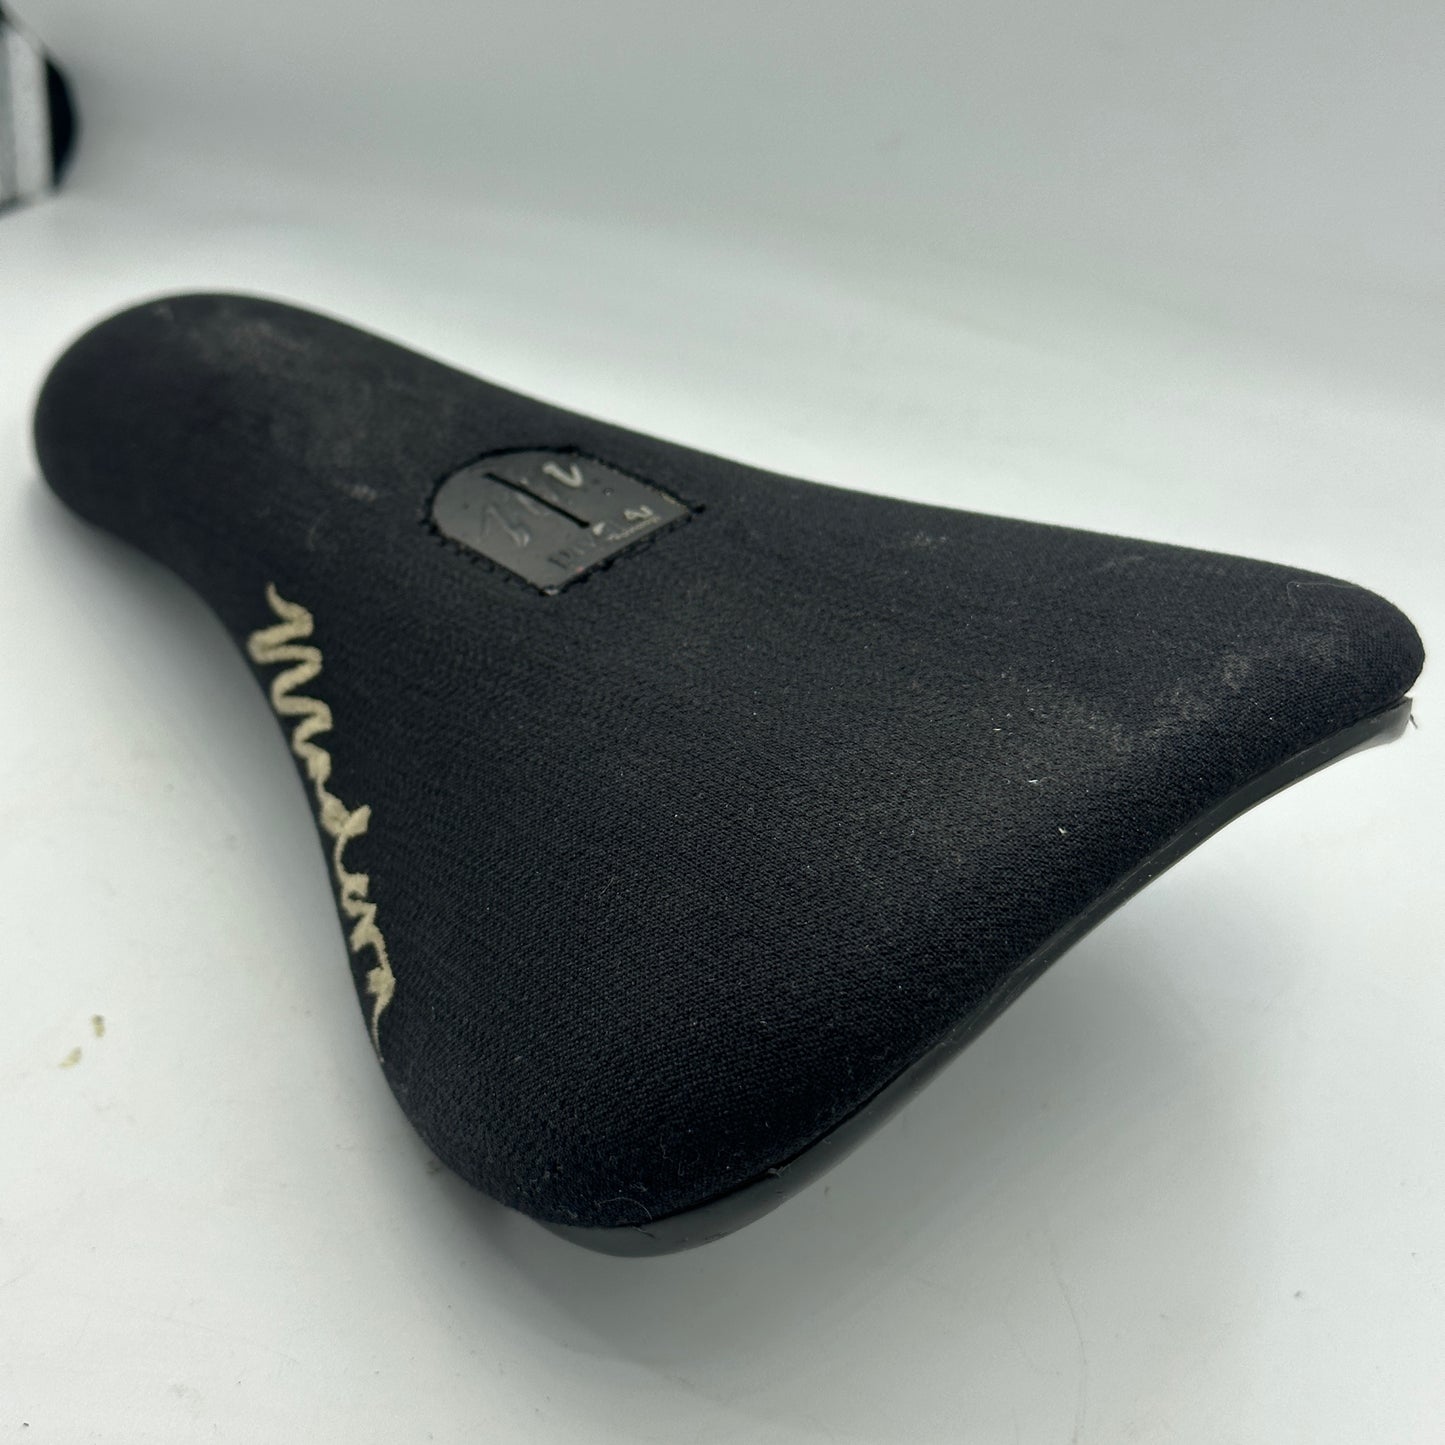 Used Madeira Pivotal Seat